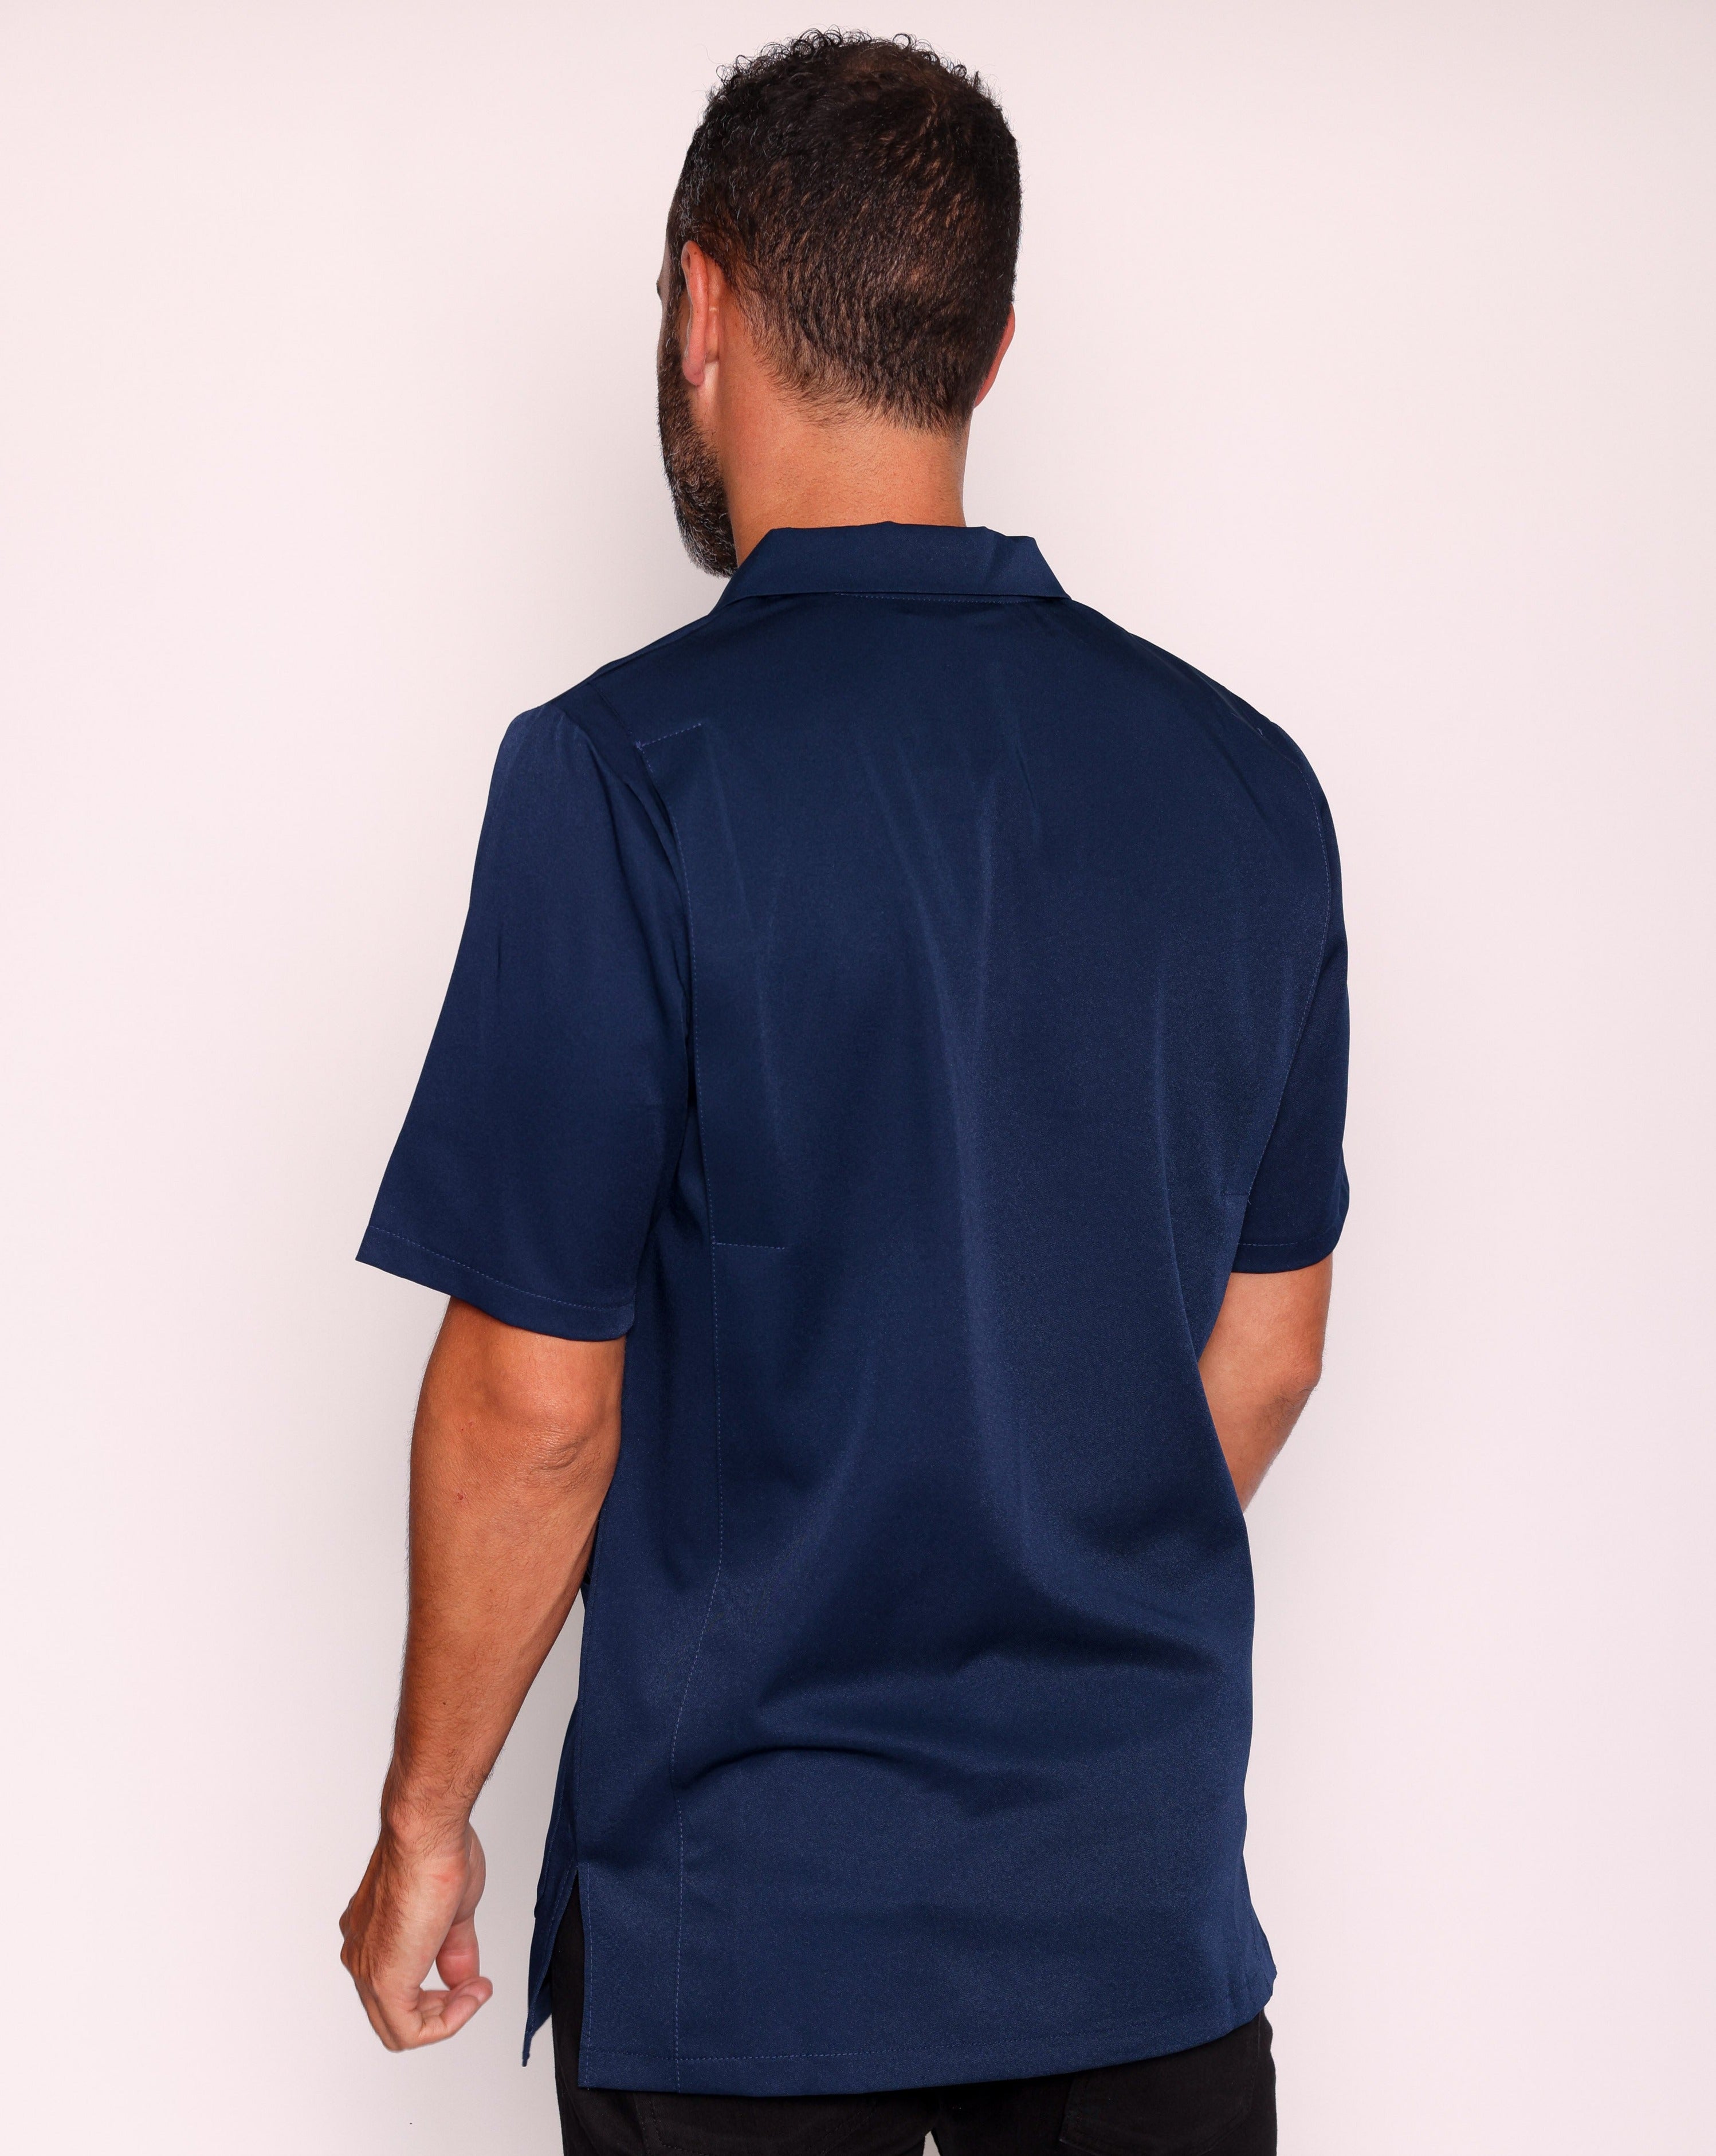 Sketch Collared Work Tunic - Navy